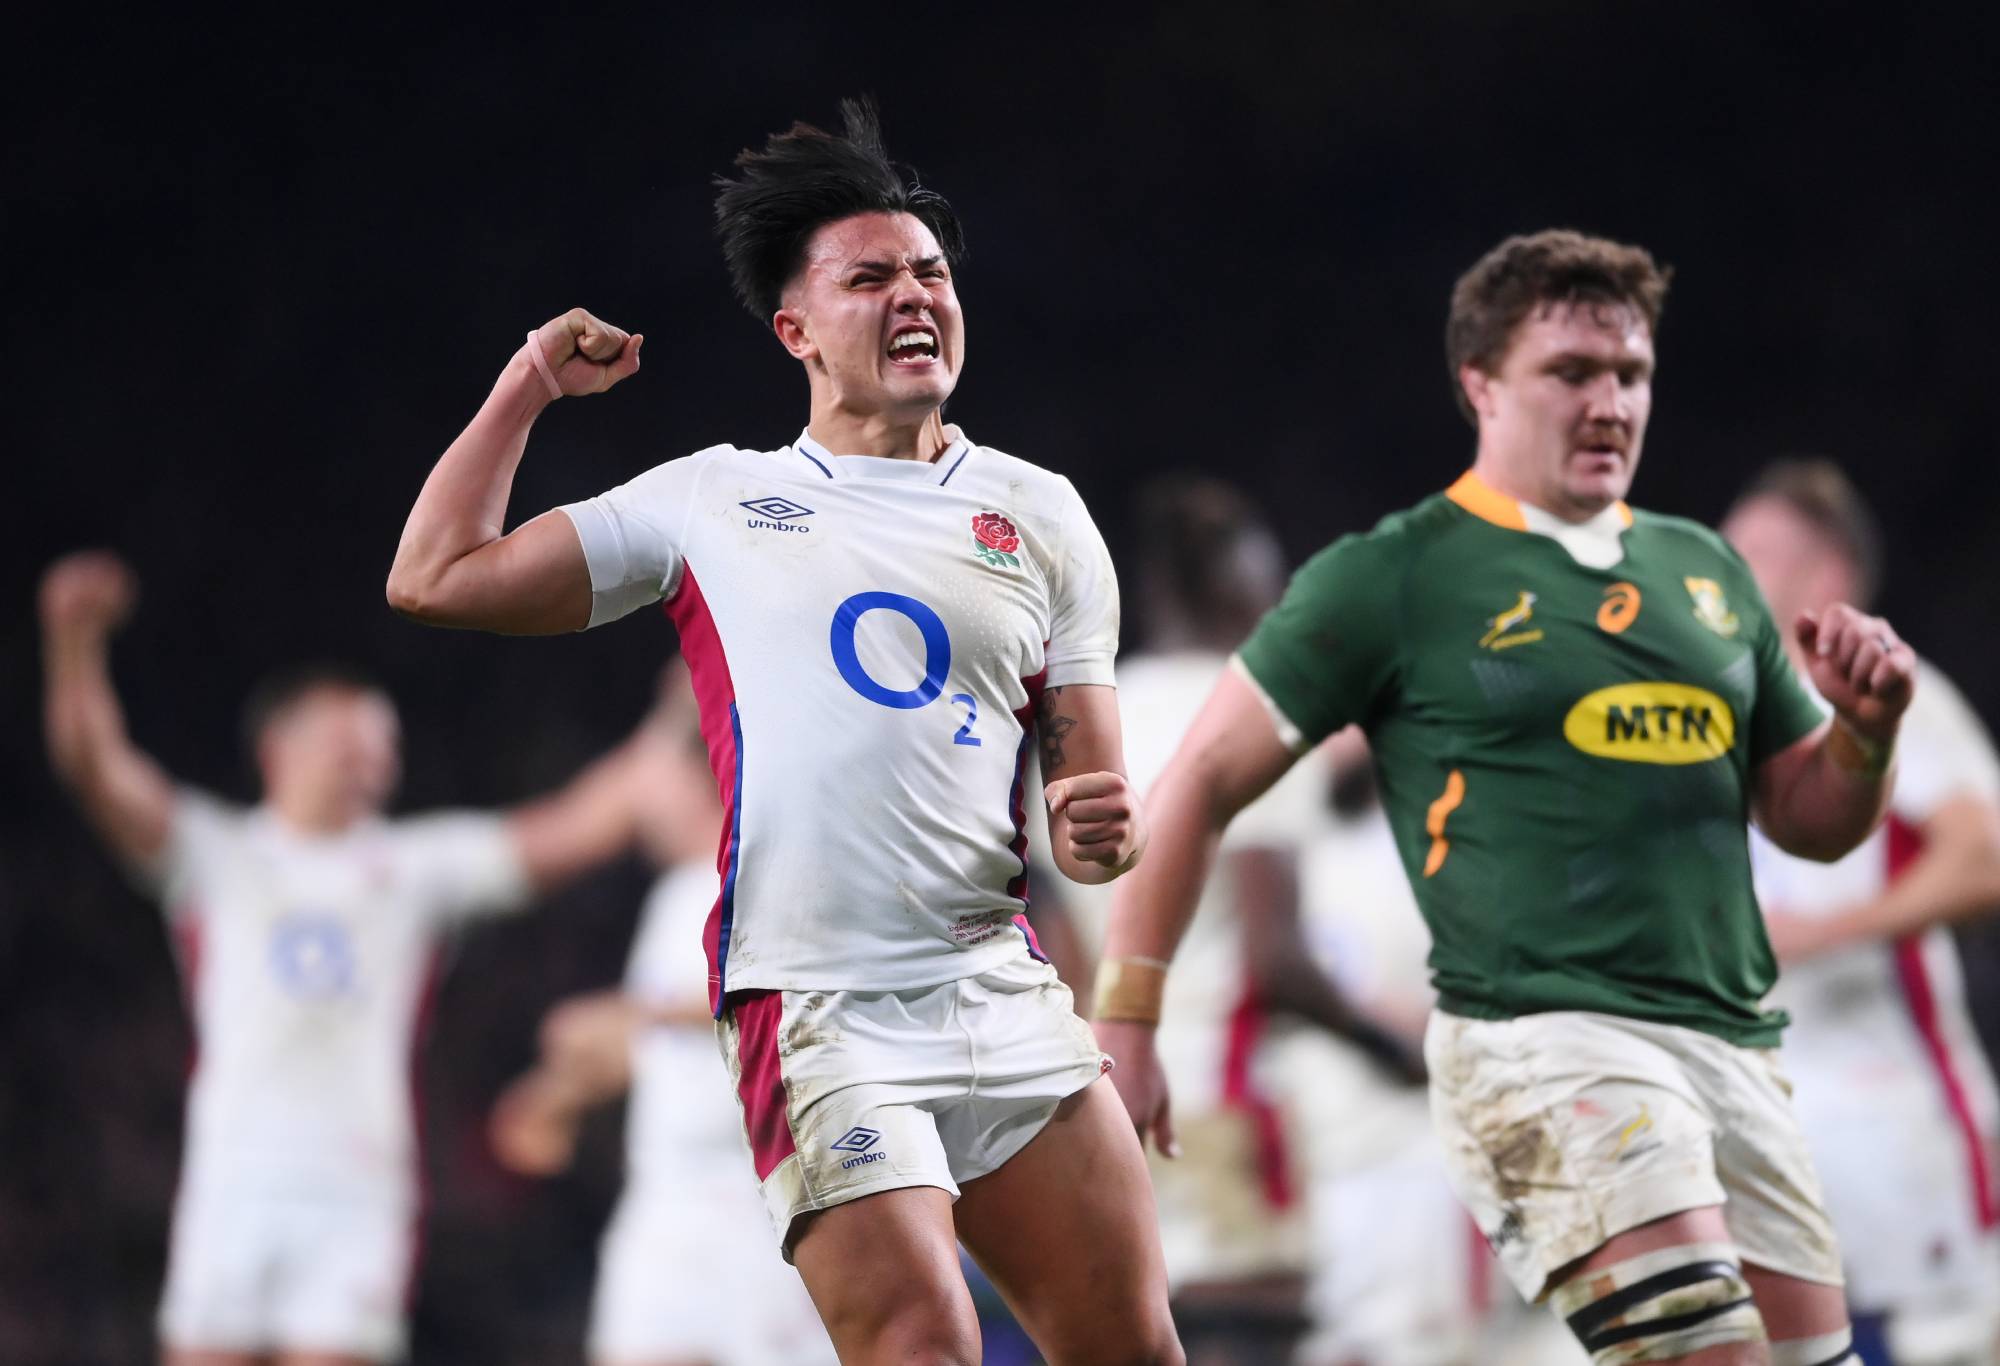 Marcus Smith of England celebrates after being awarded a penalty on the last play during the Autumn Nations Series match between England and South Africa at Twickenham Stadium on November 20, 2021 in London, England. (Photo by Laurence Griffiths/Getty Images)